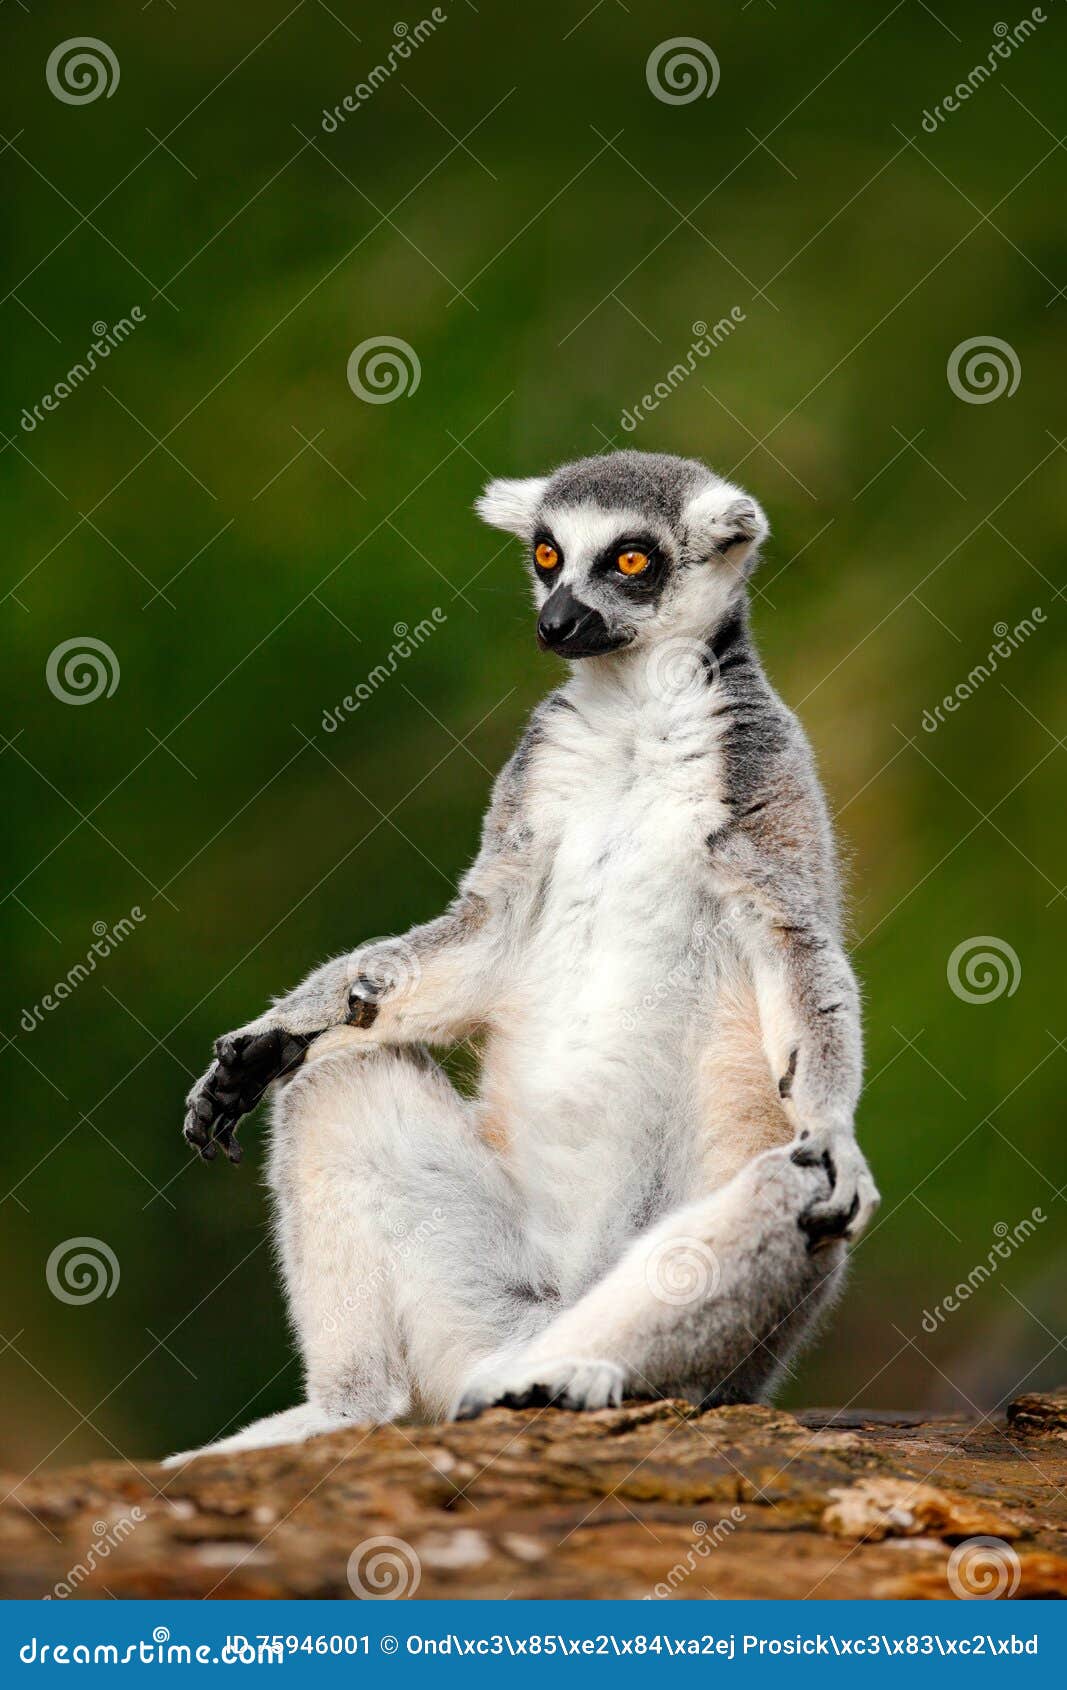 ring-tailed lemur, lemur catta, with green clear background. large strepsirrhine primate in the nature habitat. cute animal from